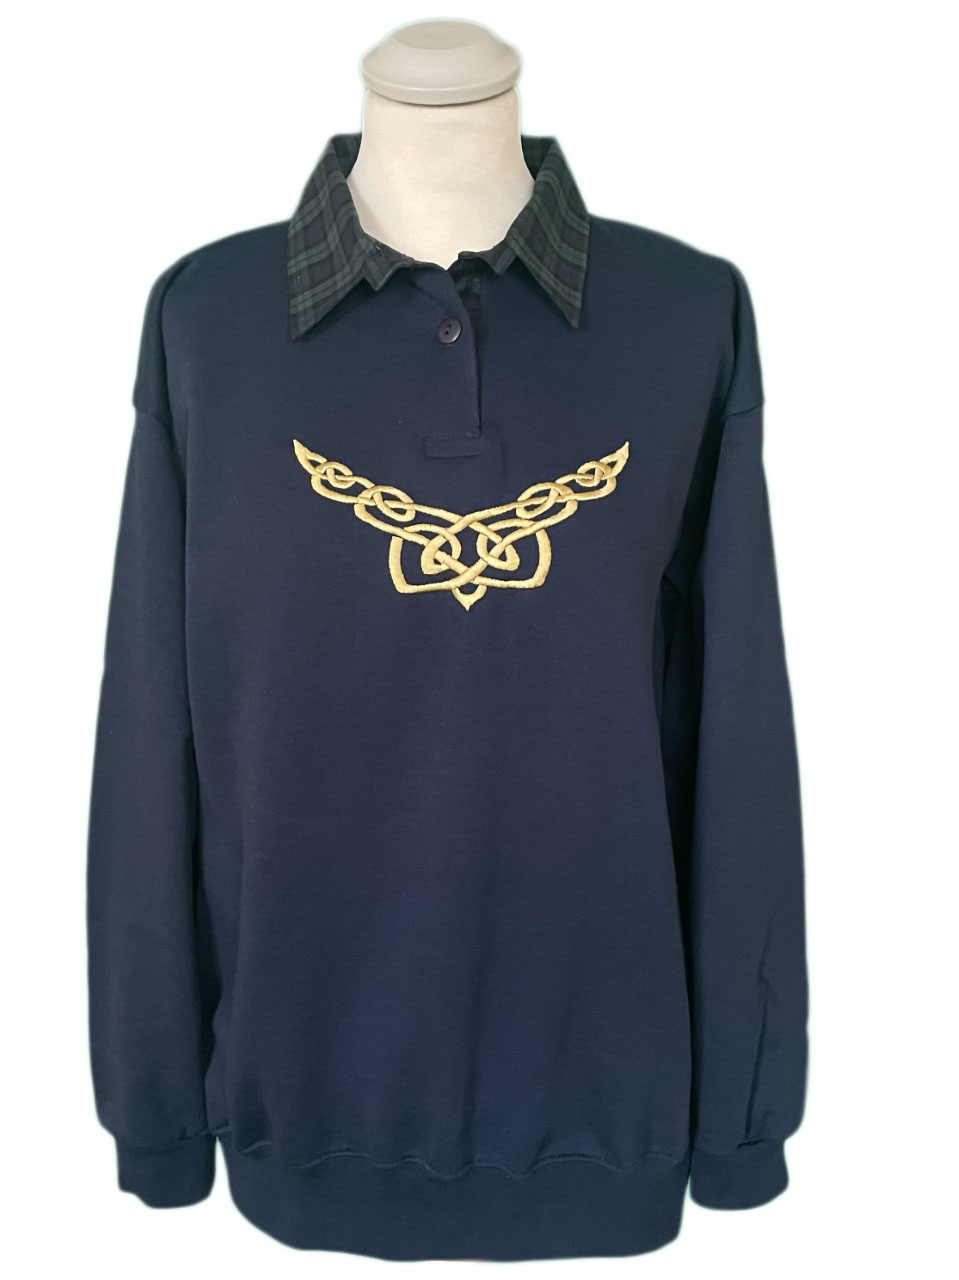 navy jumper with a tartan collar with the celtick knot embroidered on the front of the jumper